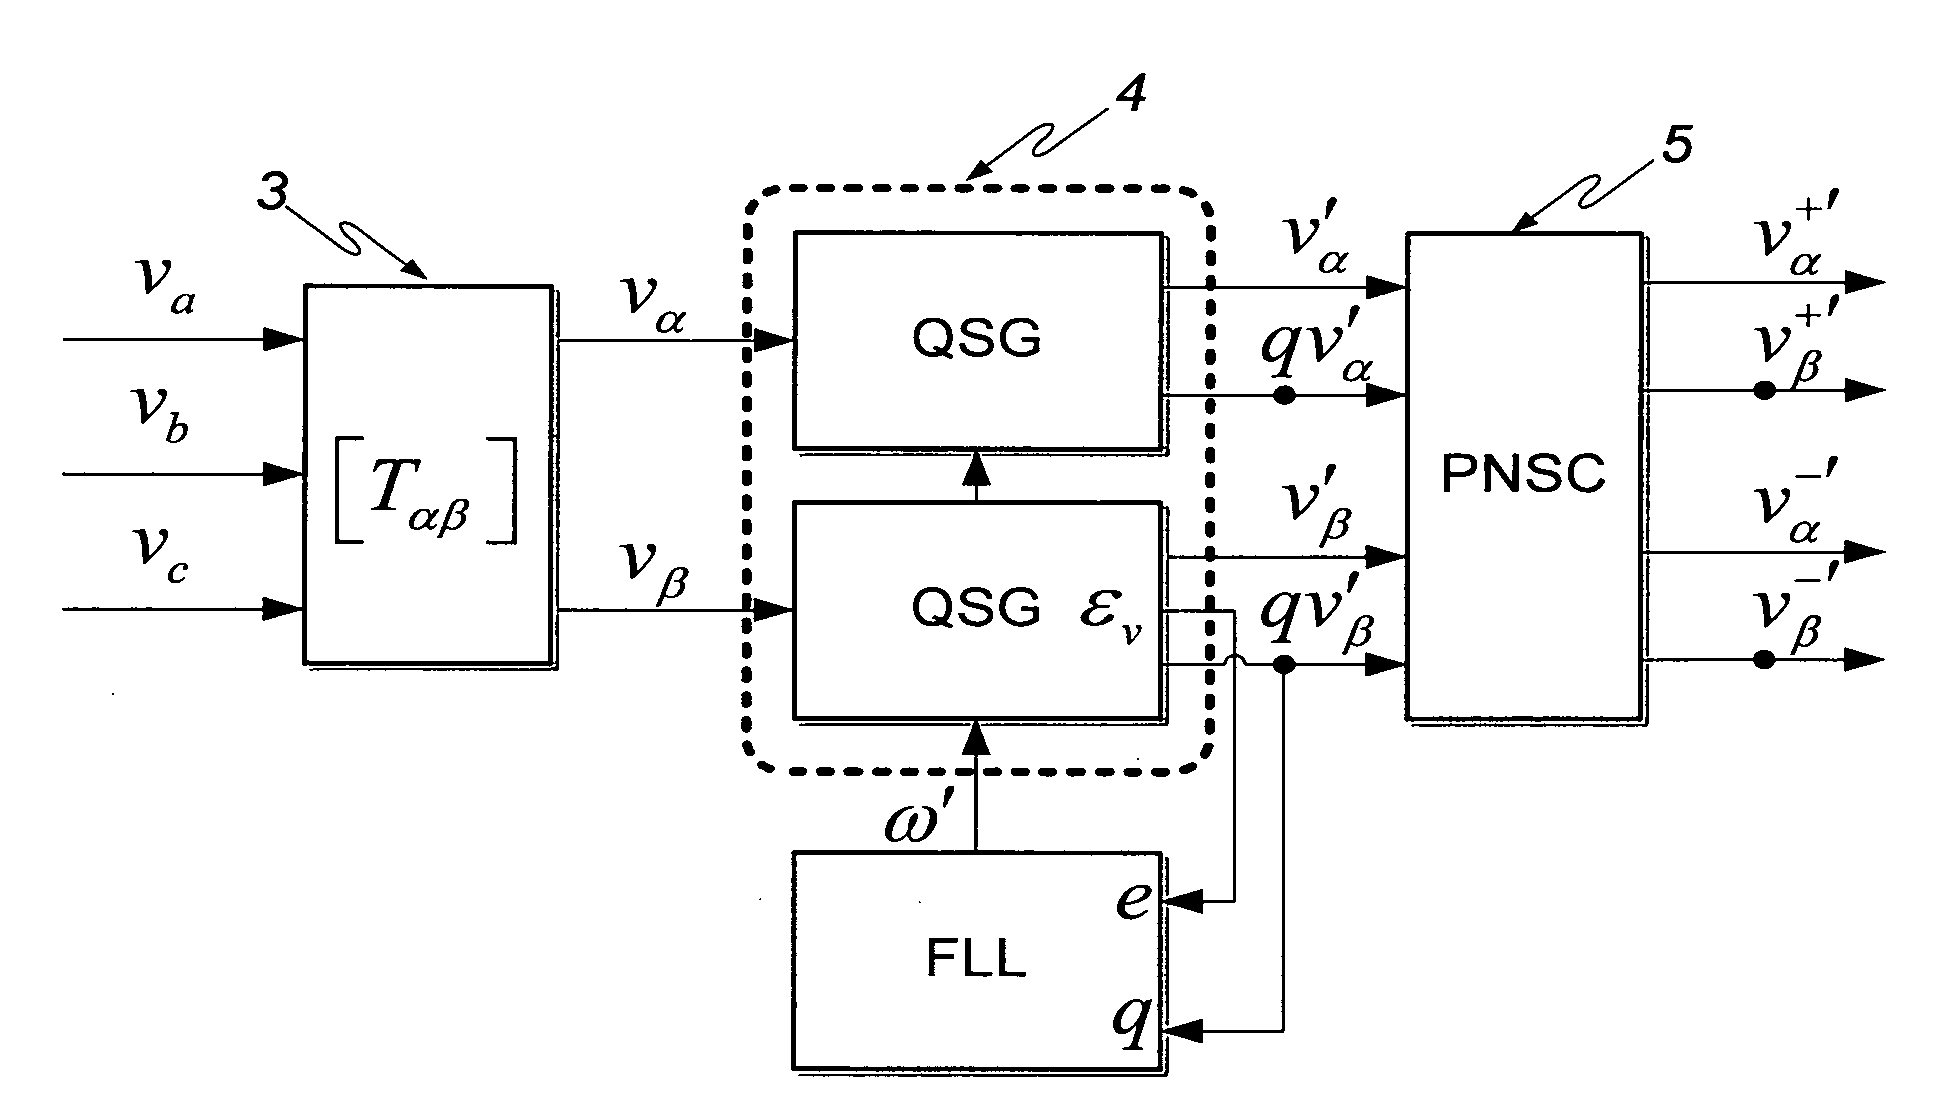 Advanced real-time grid monitoring system and method